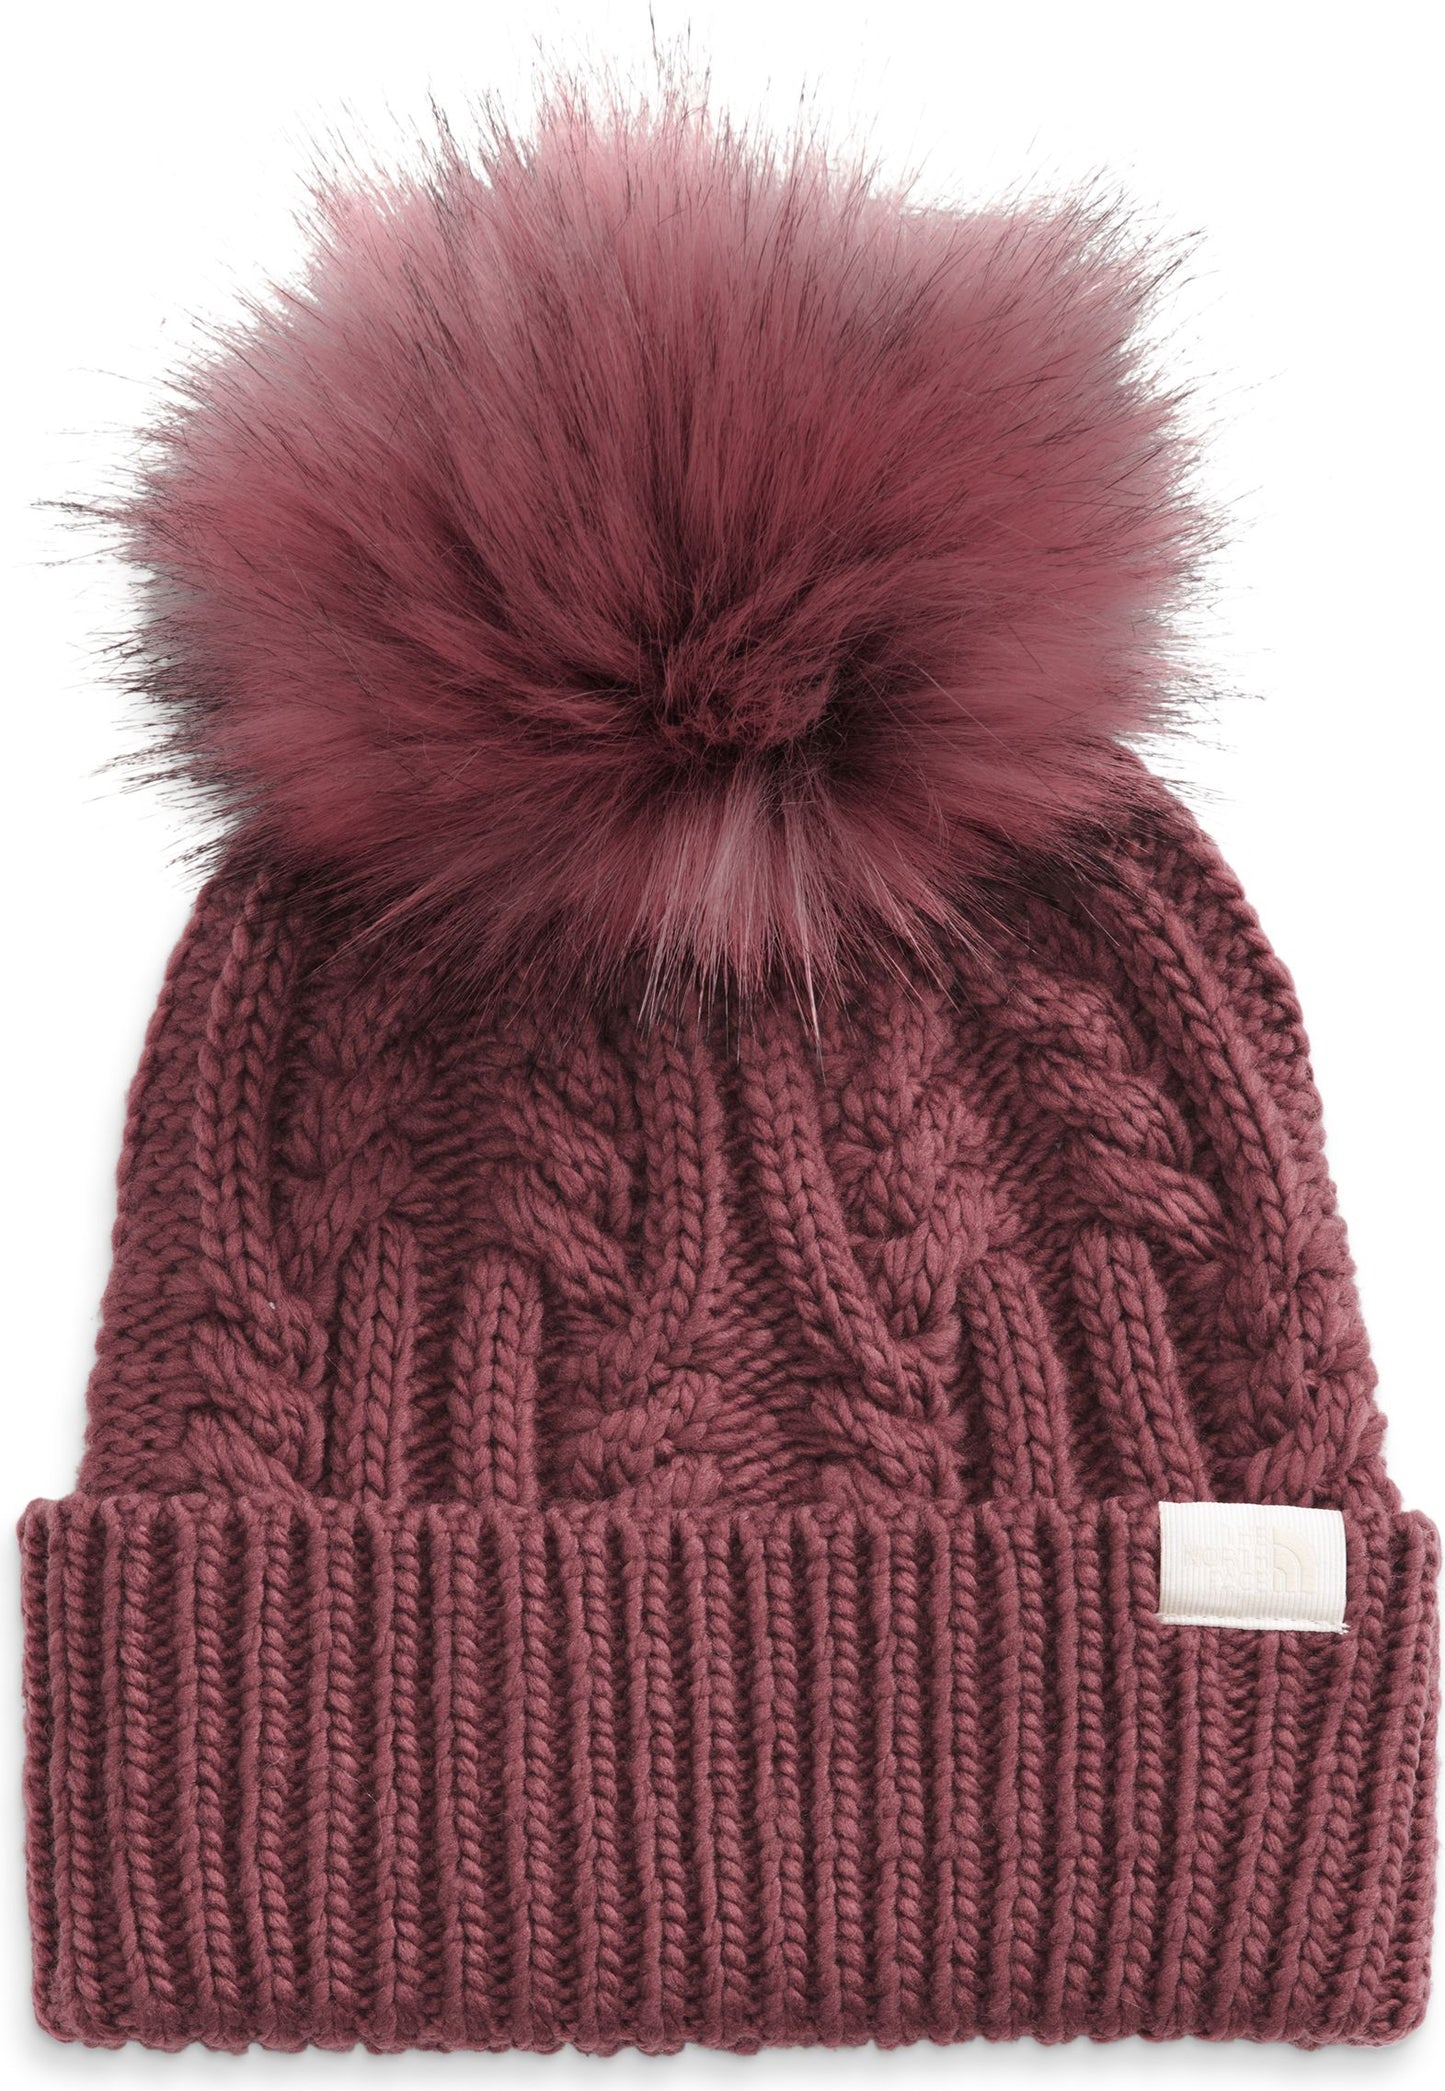 The North Face Accessories Women's Oh Mega Fur Pom Beanie Wild Ginger